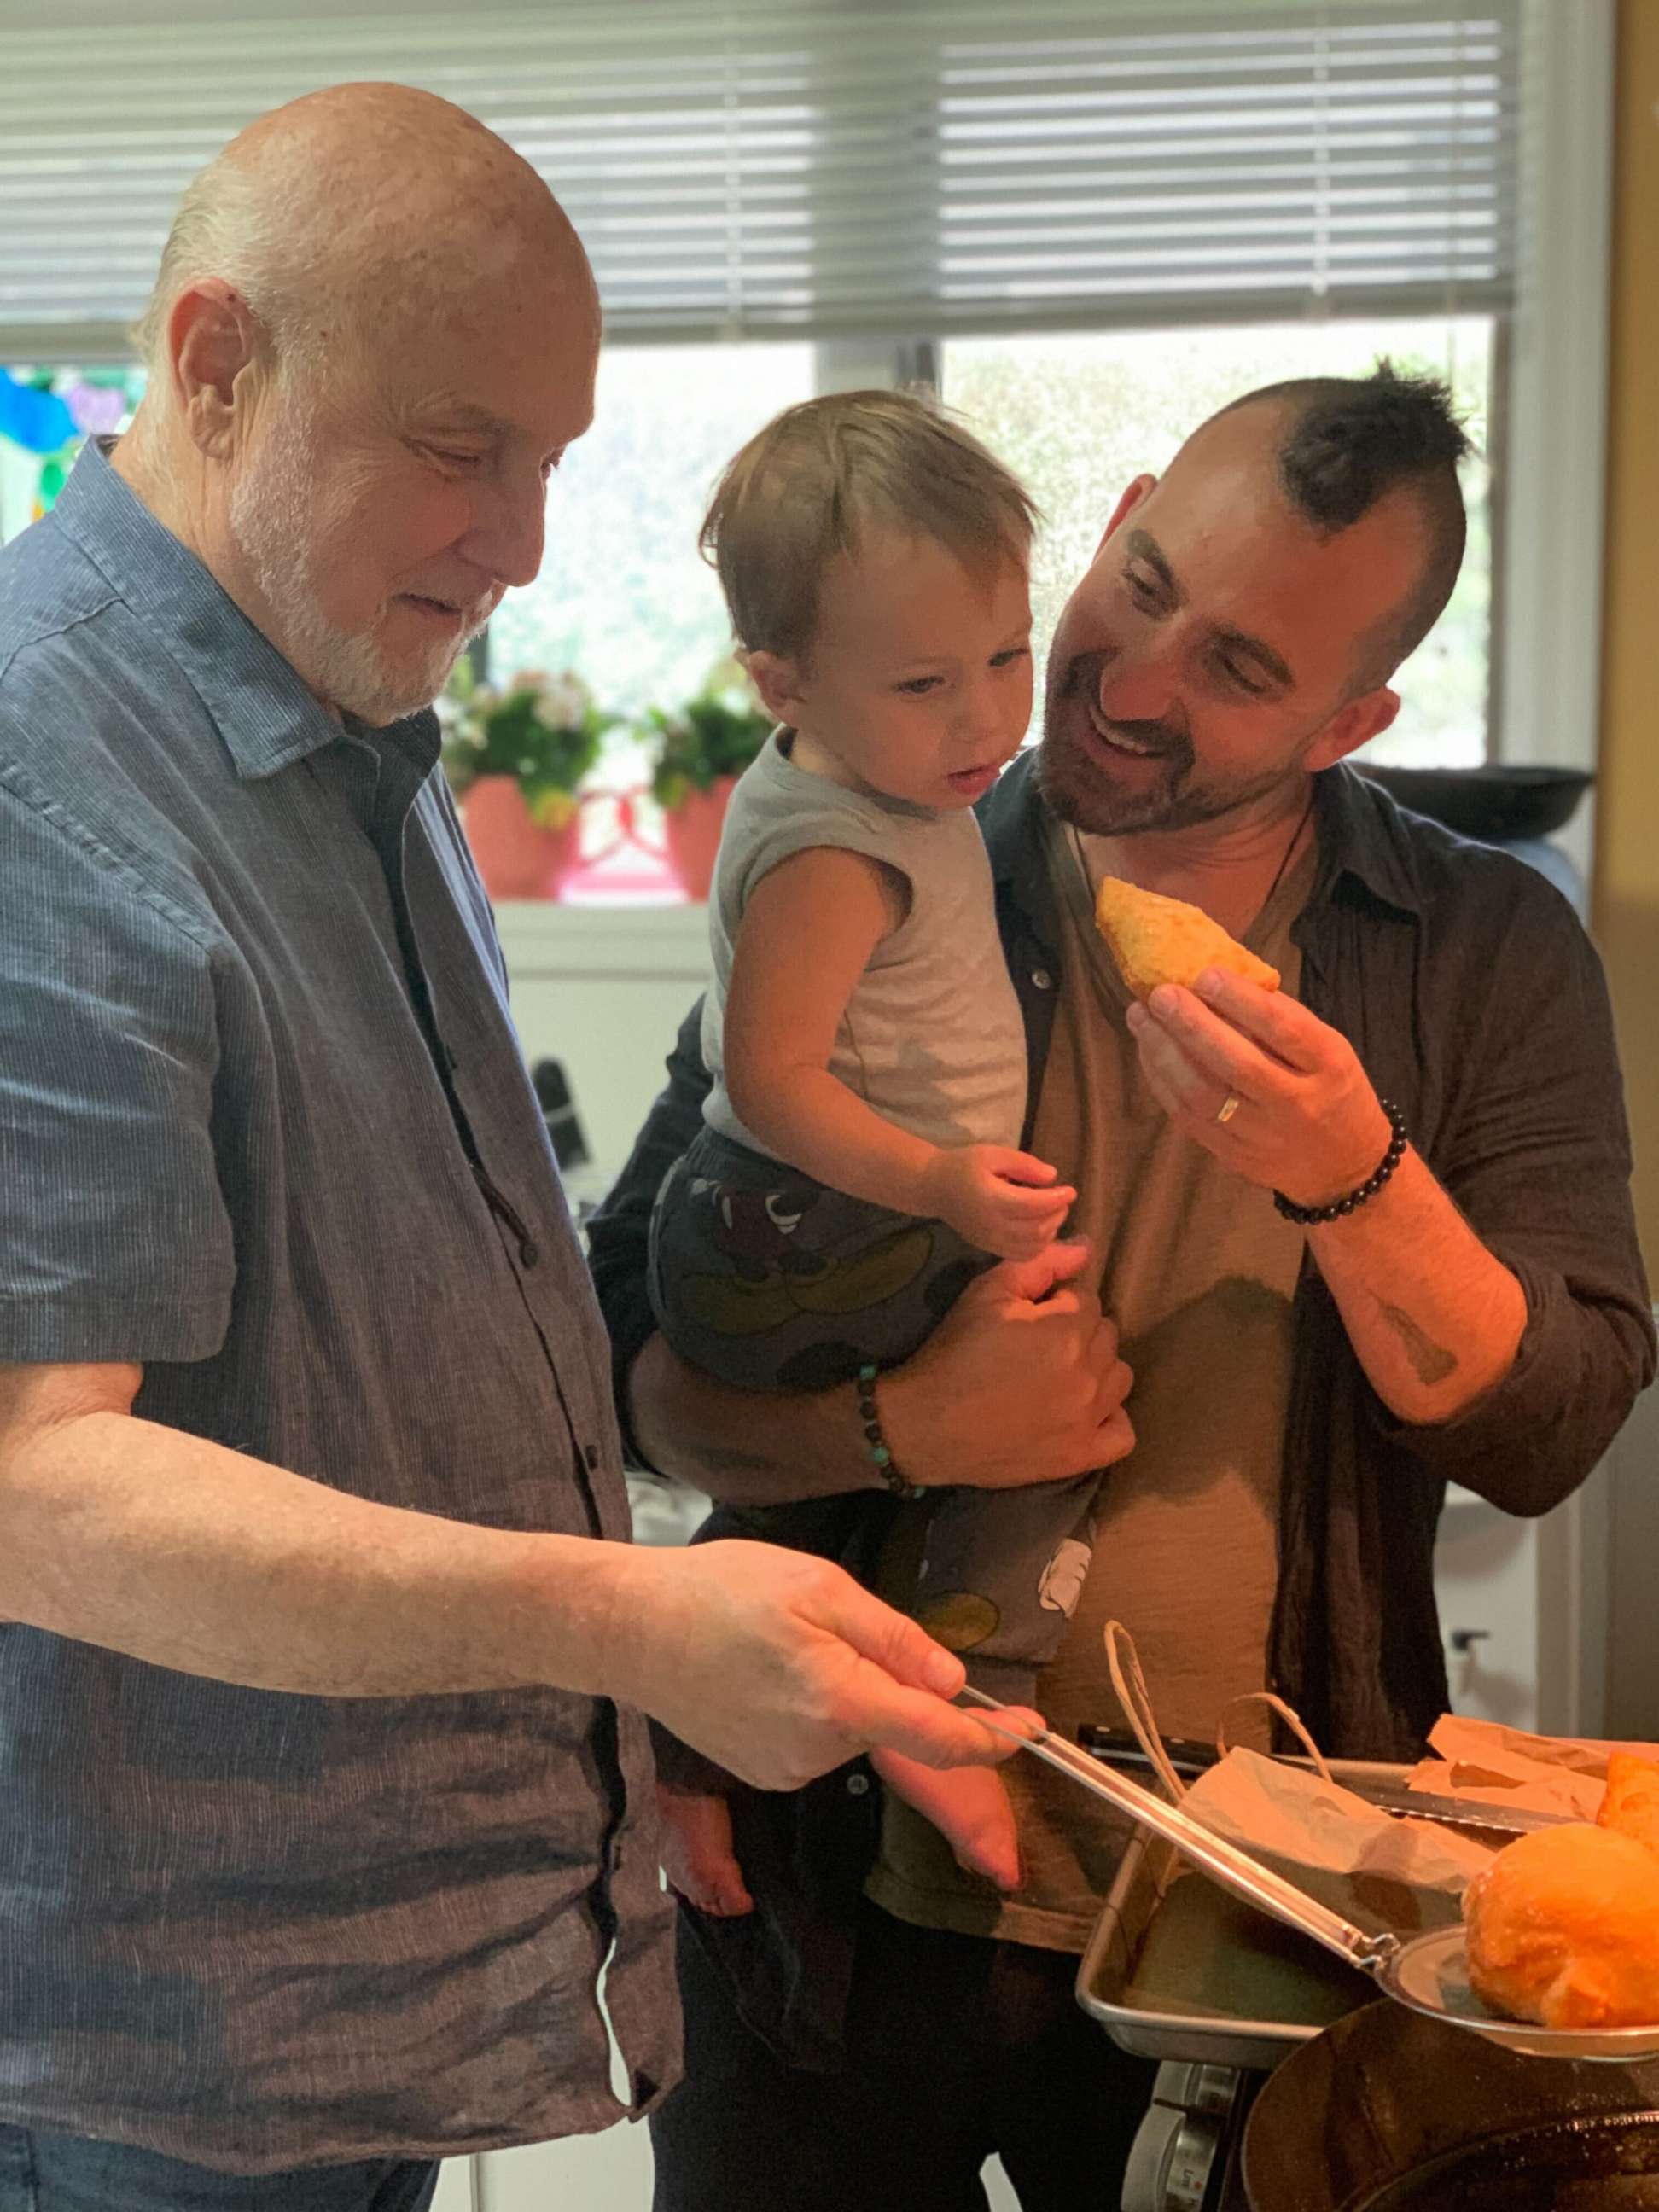 PHOTO: Larry Forgione, Marc Forgione and his three-year-old son, Sonny, eating and cooking at home.